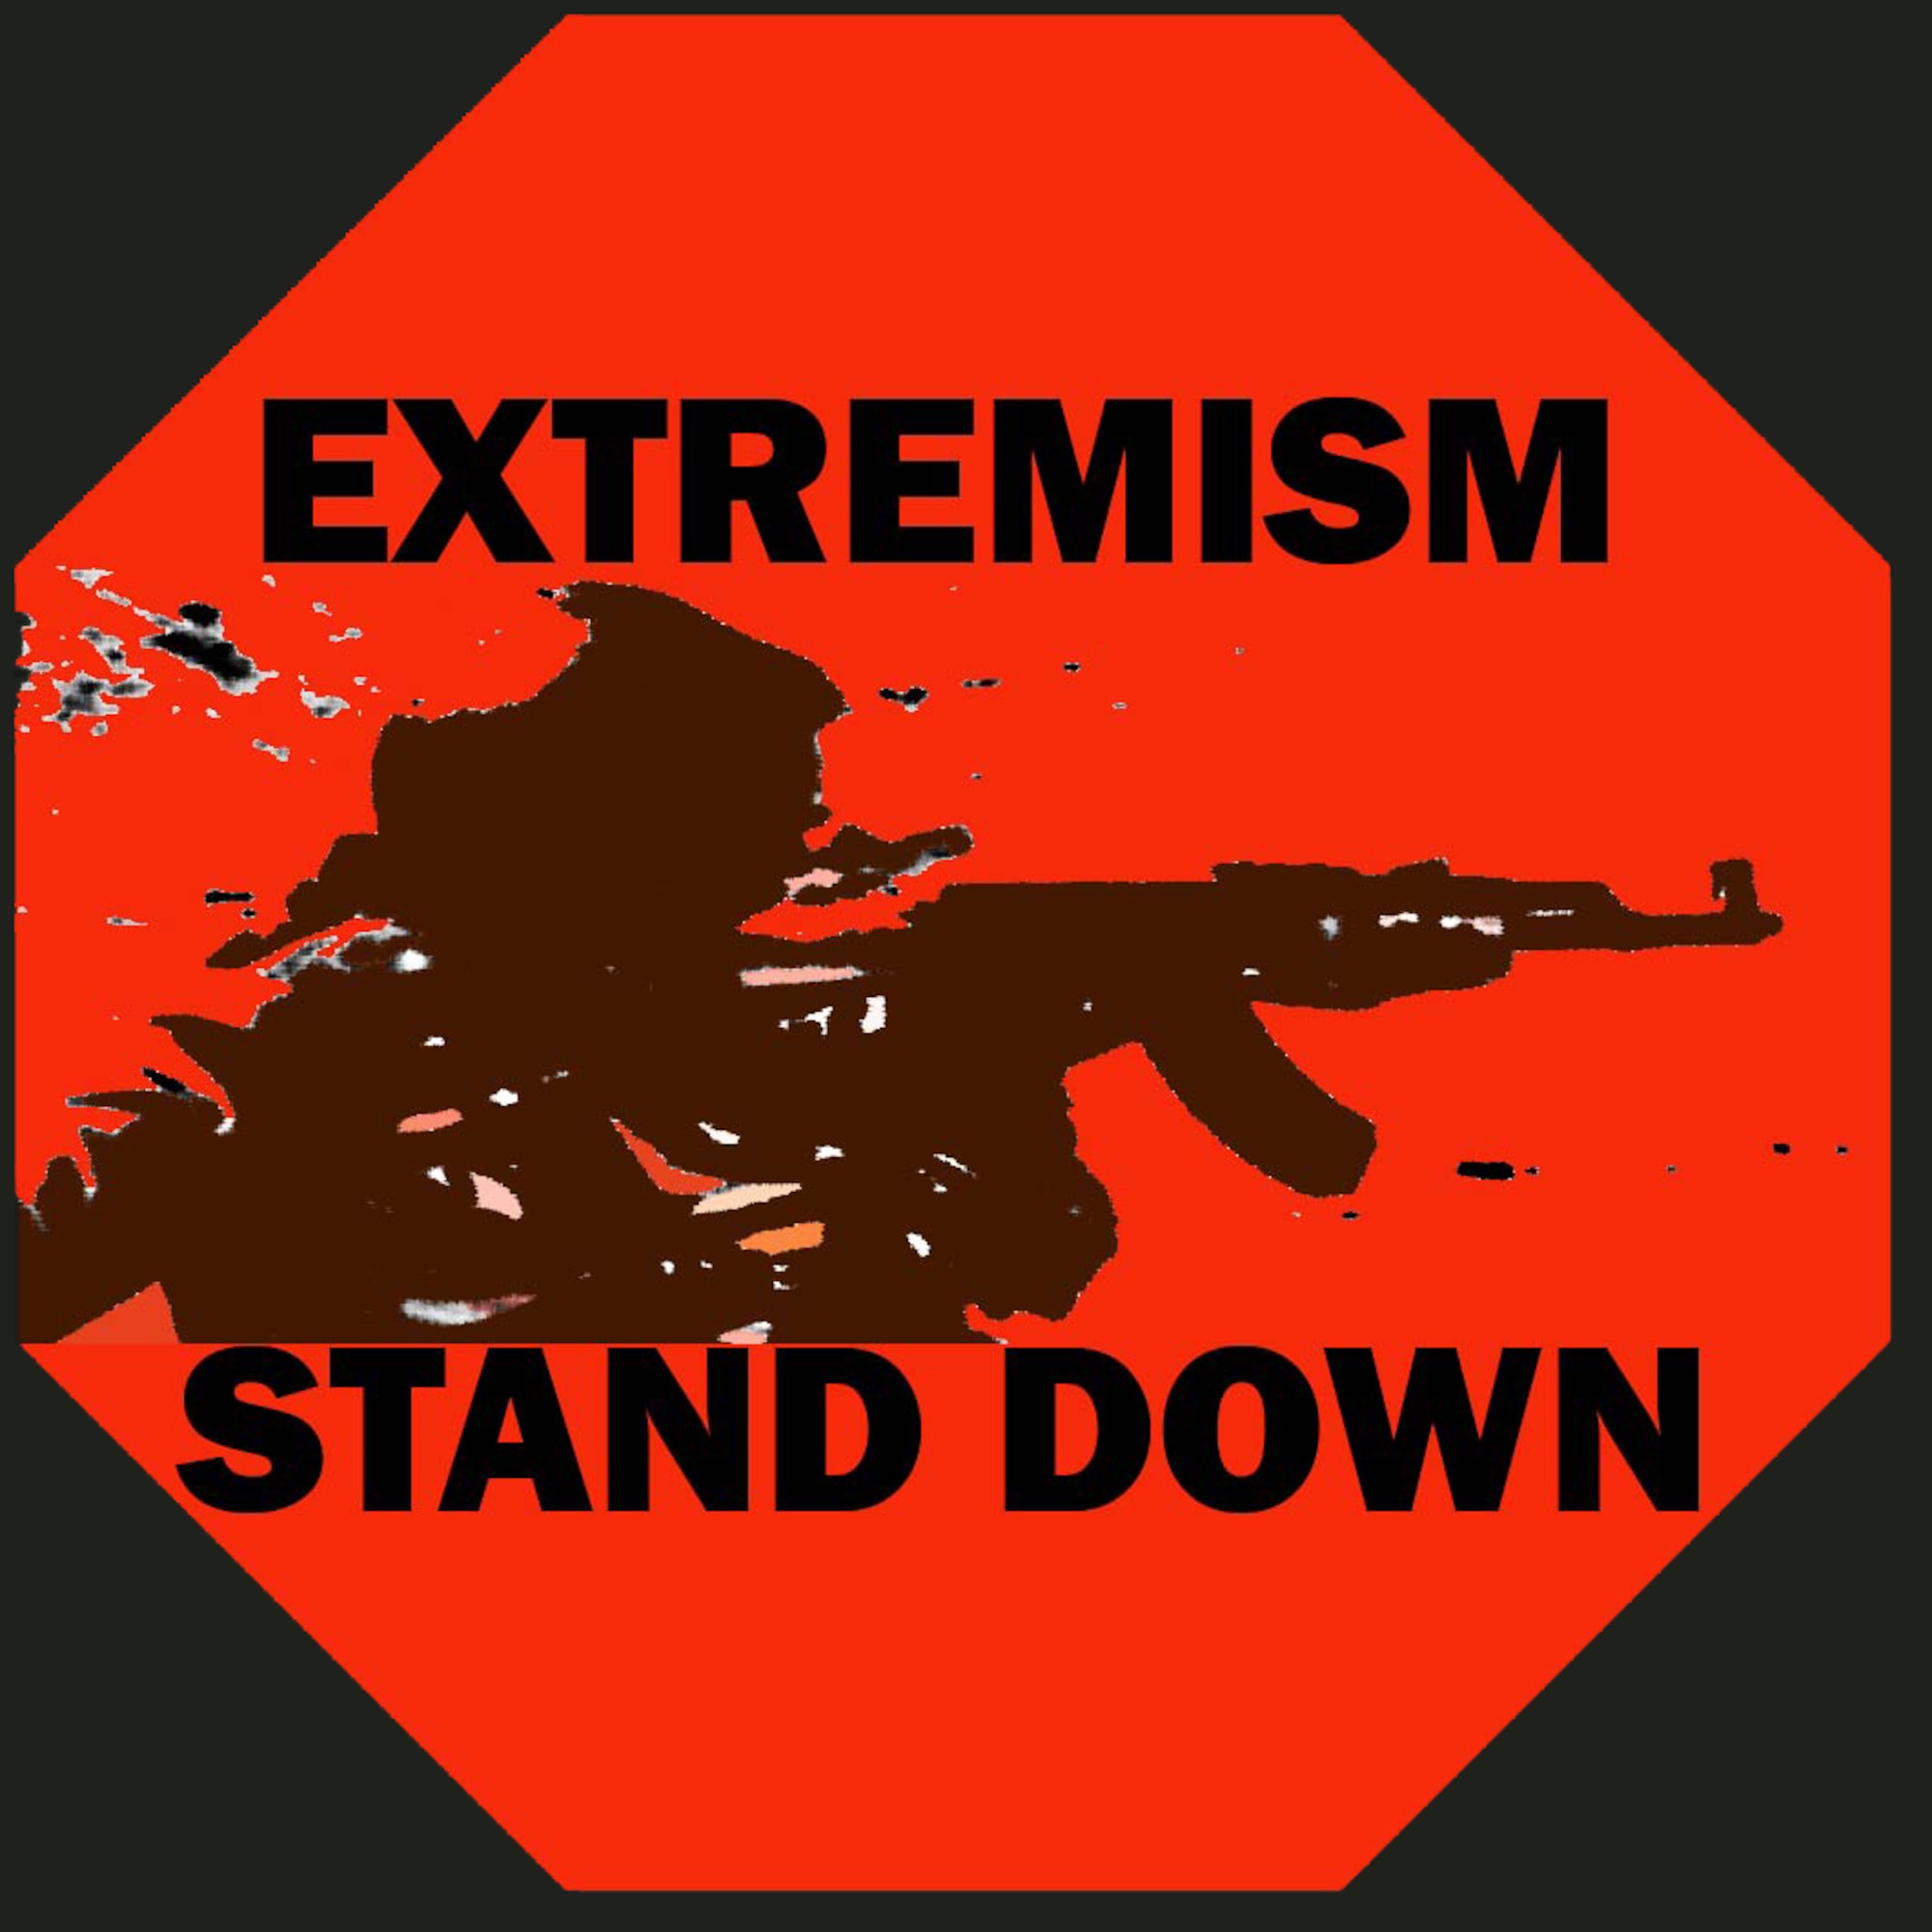 Image of a red stop sign containing a silhouette of a man laying in the prone position, holding an AK-47 with text that reads, "Extremism Stand down."